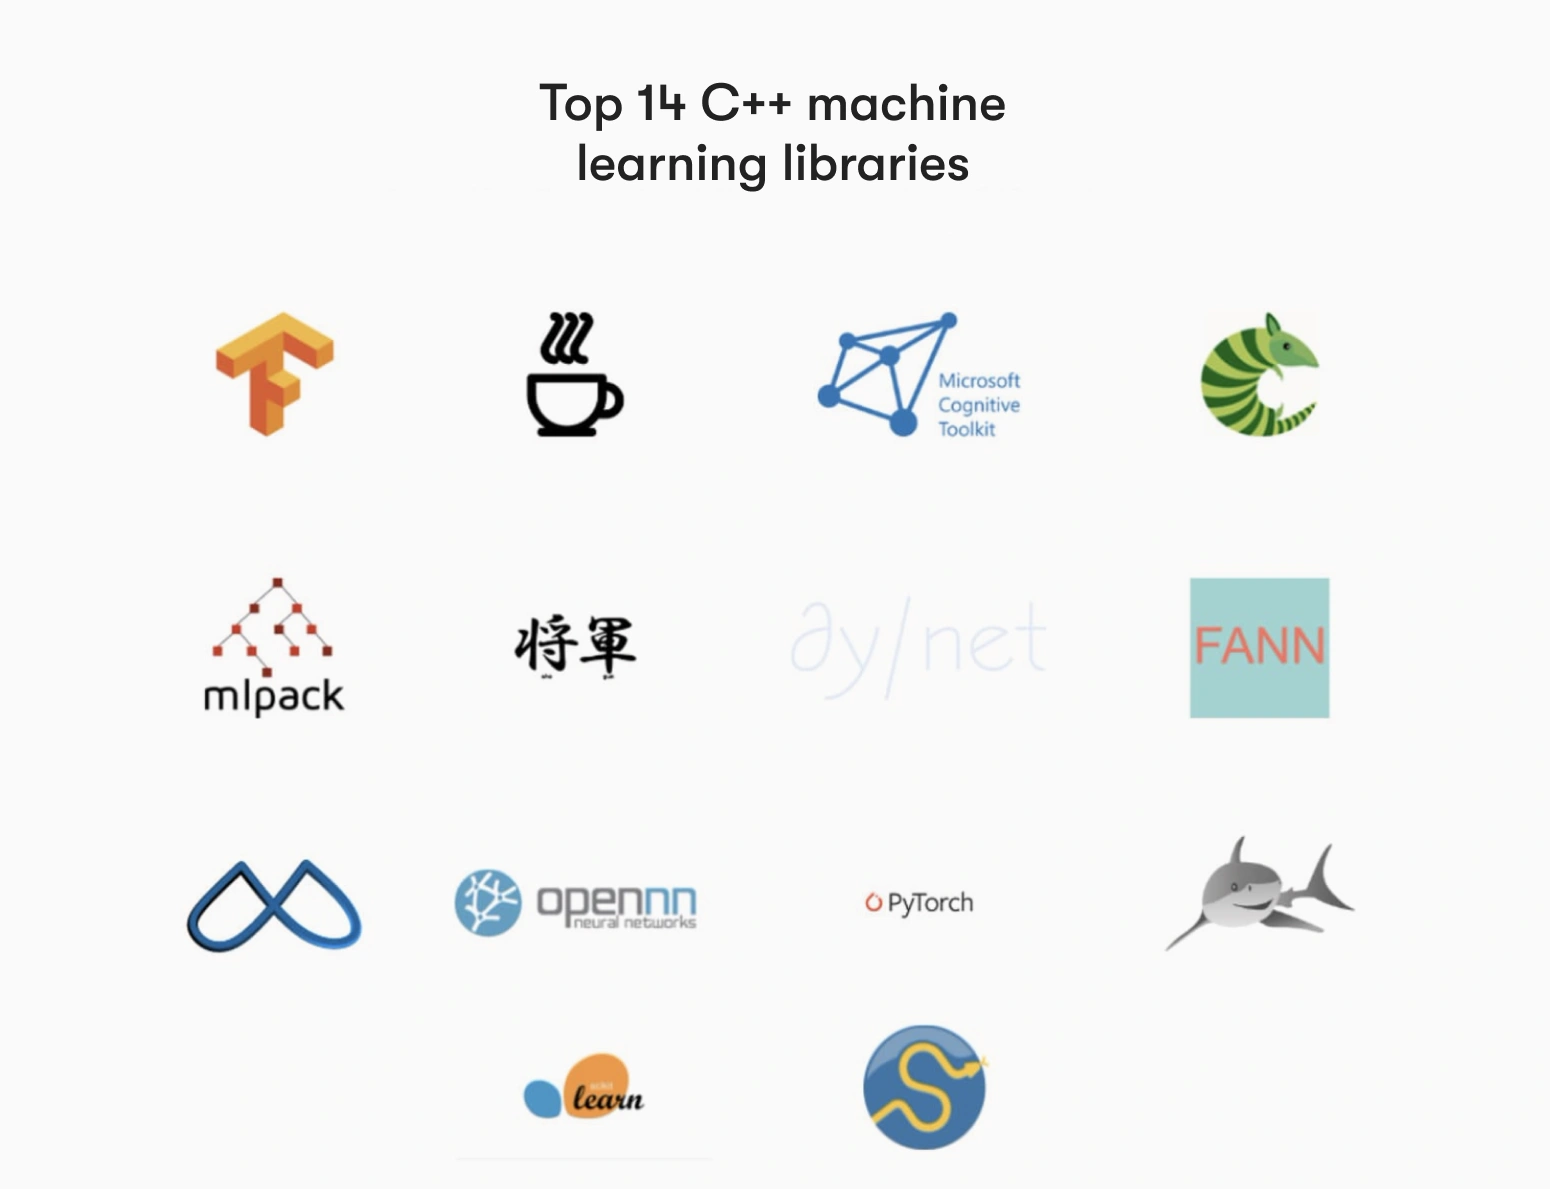 machine learning libraries for C++